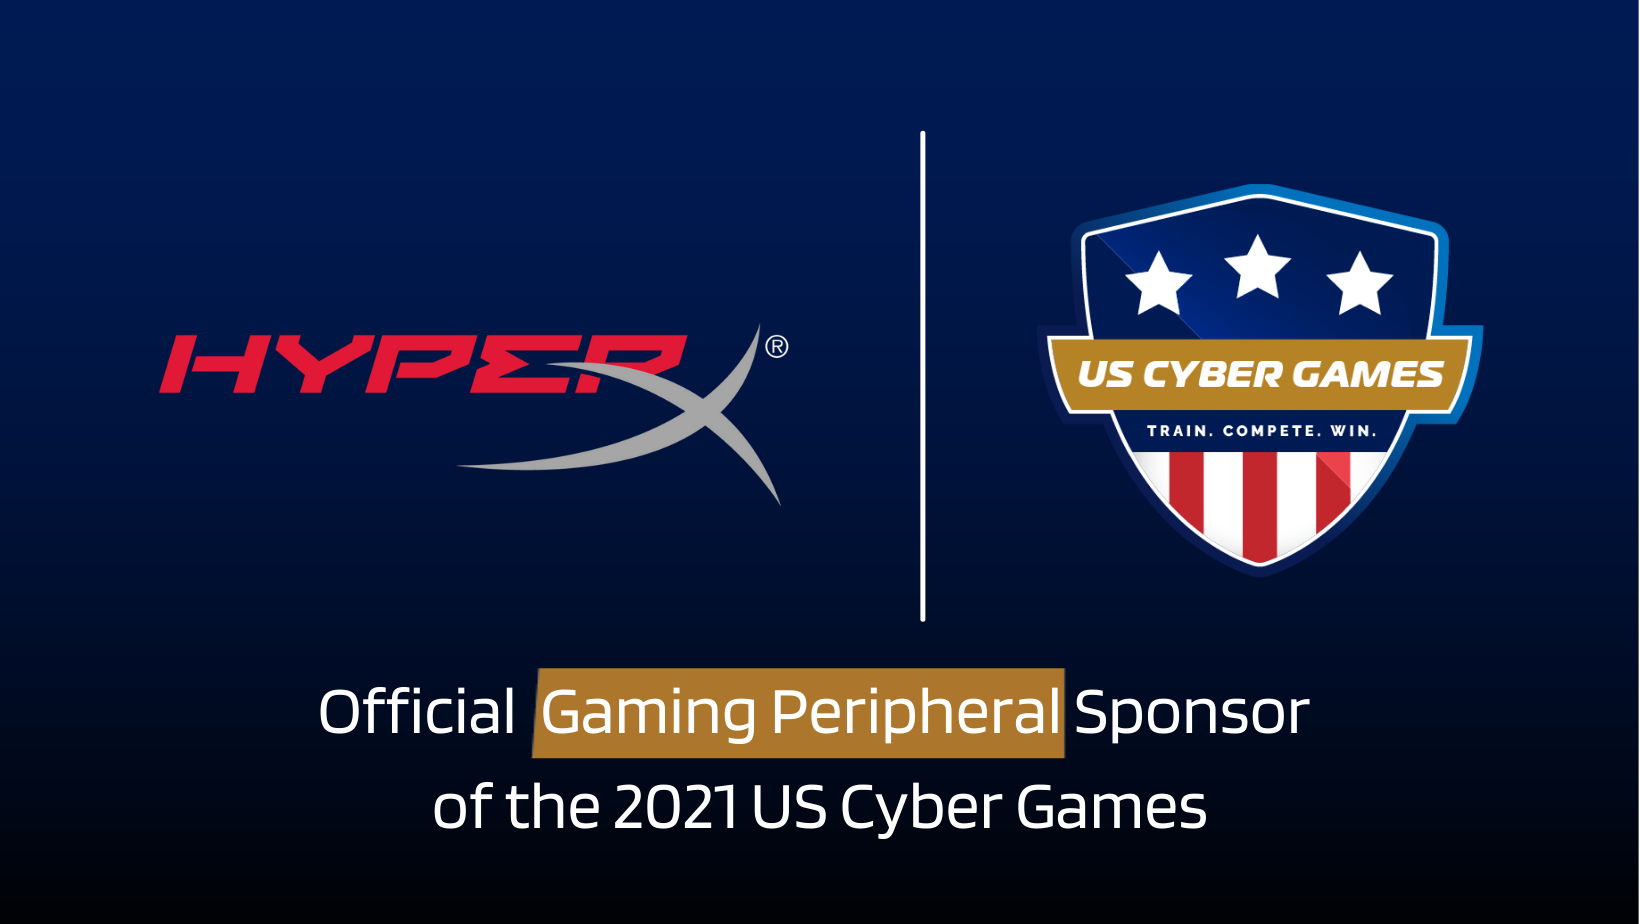 HyperX Official Gaming Peripheral Sponsor of US Cyber Games